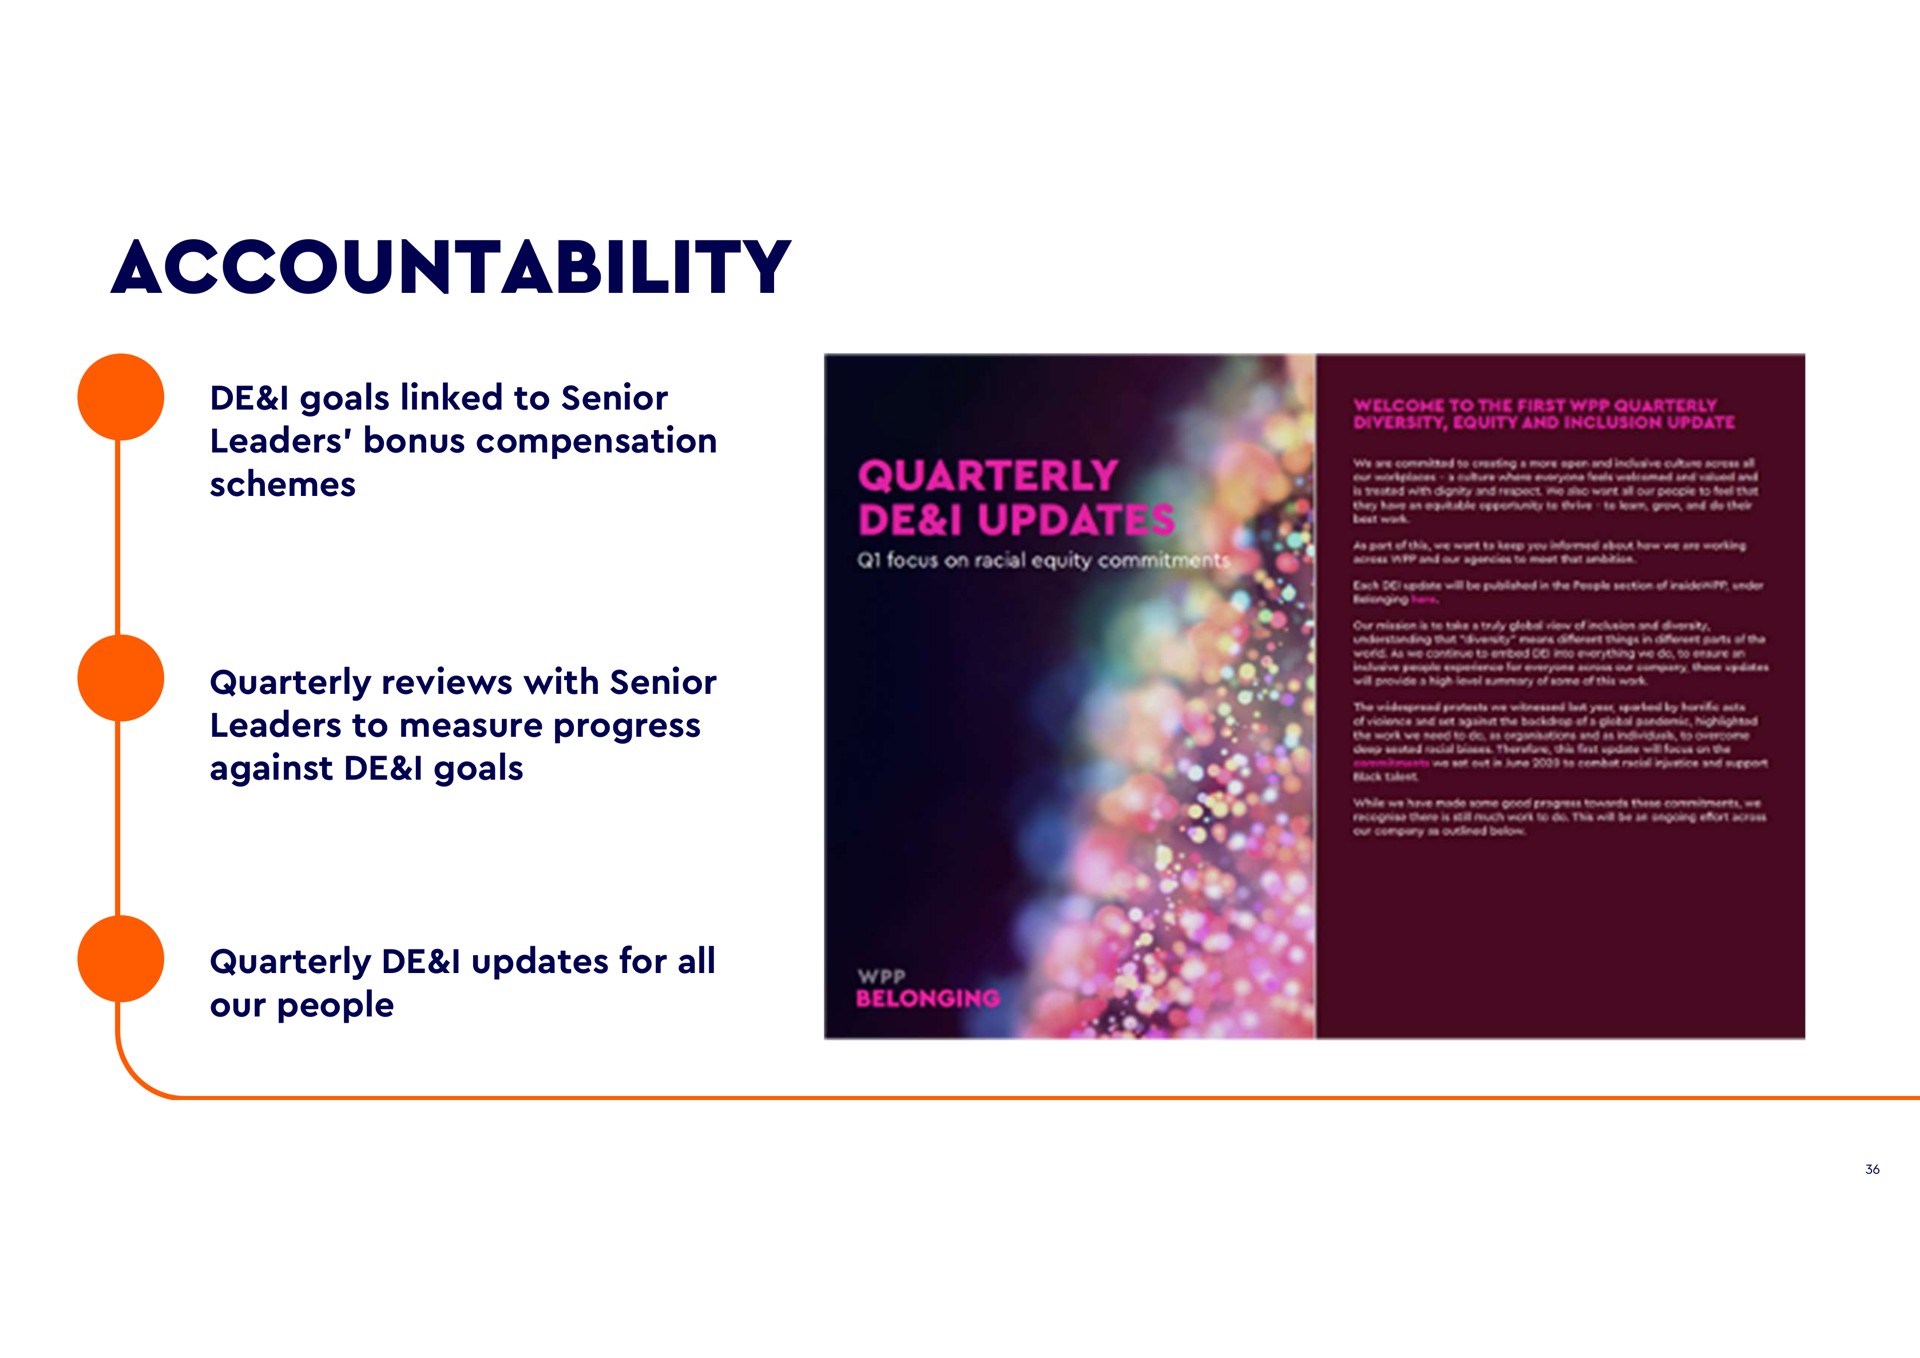 accountability i goals linked to senior leaders bonus compensation schemes quarterly reviews with senior leaders to measure progress against goals quarterly updates for all our people | WPP